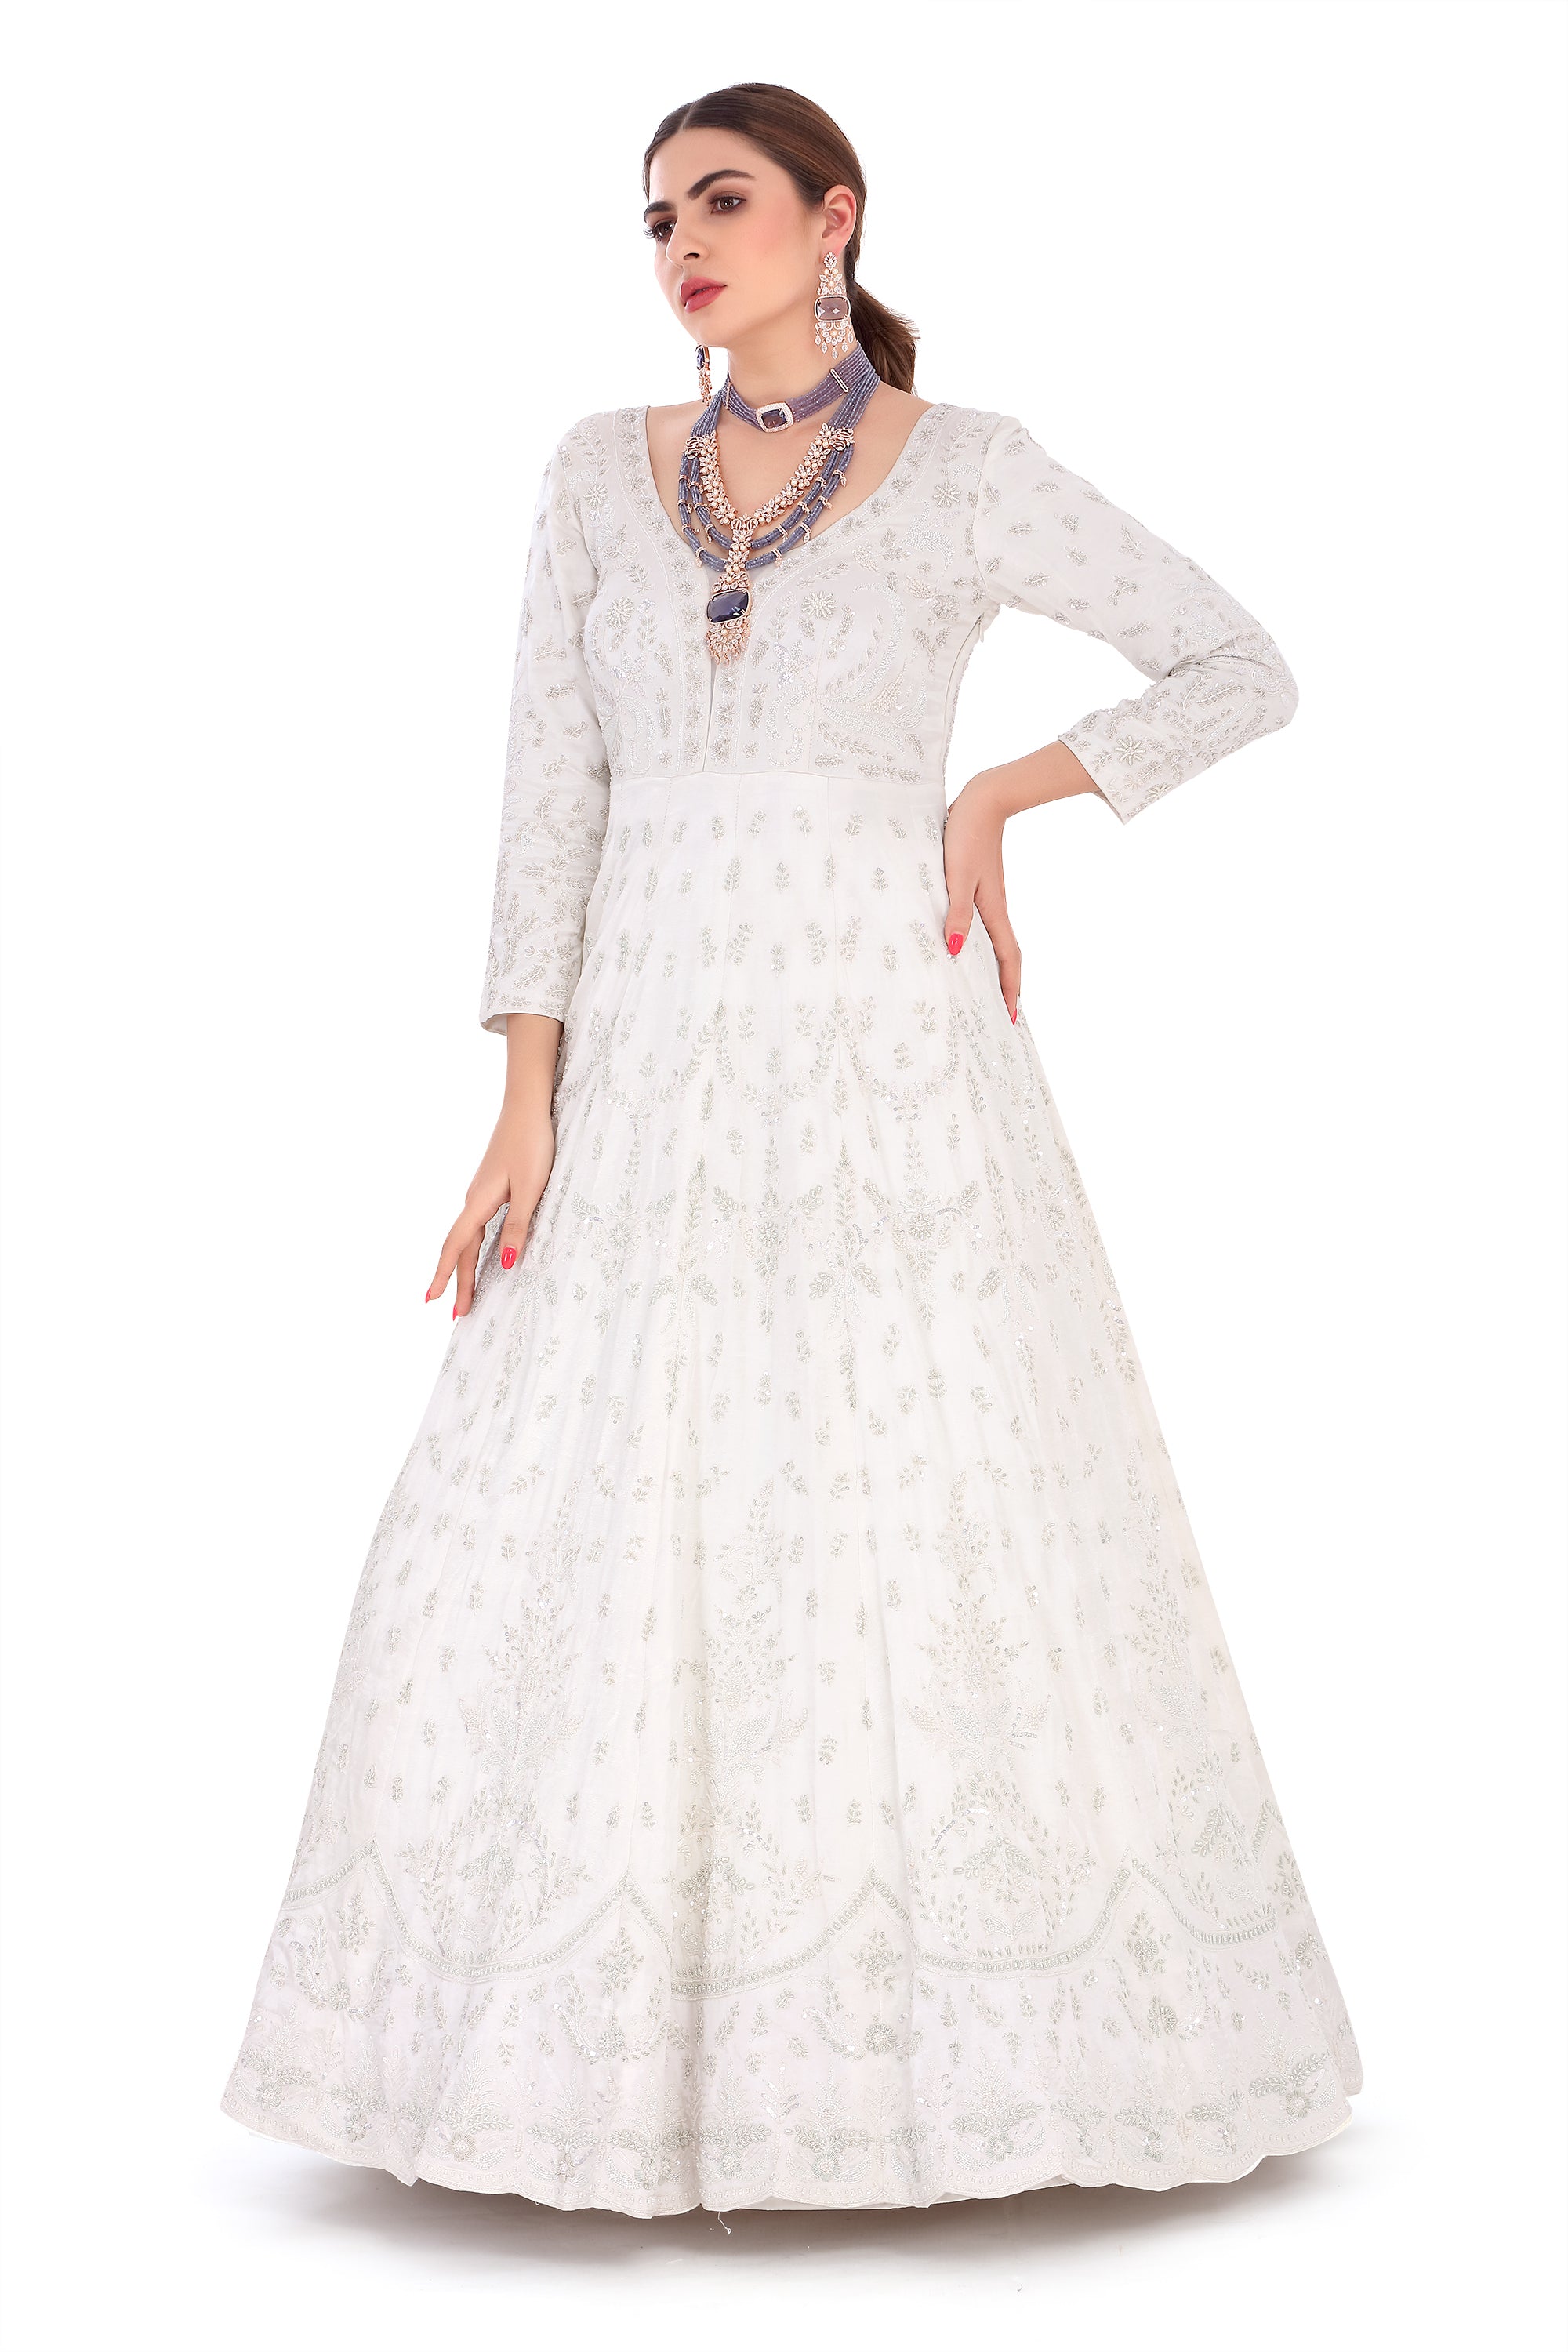 white gown for women